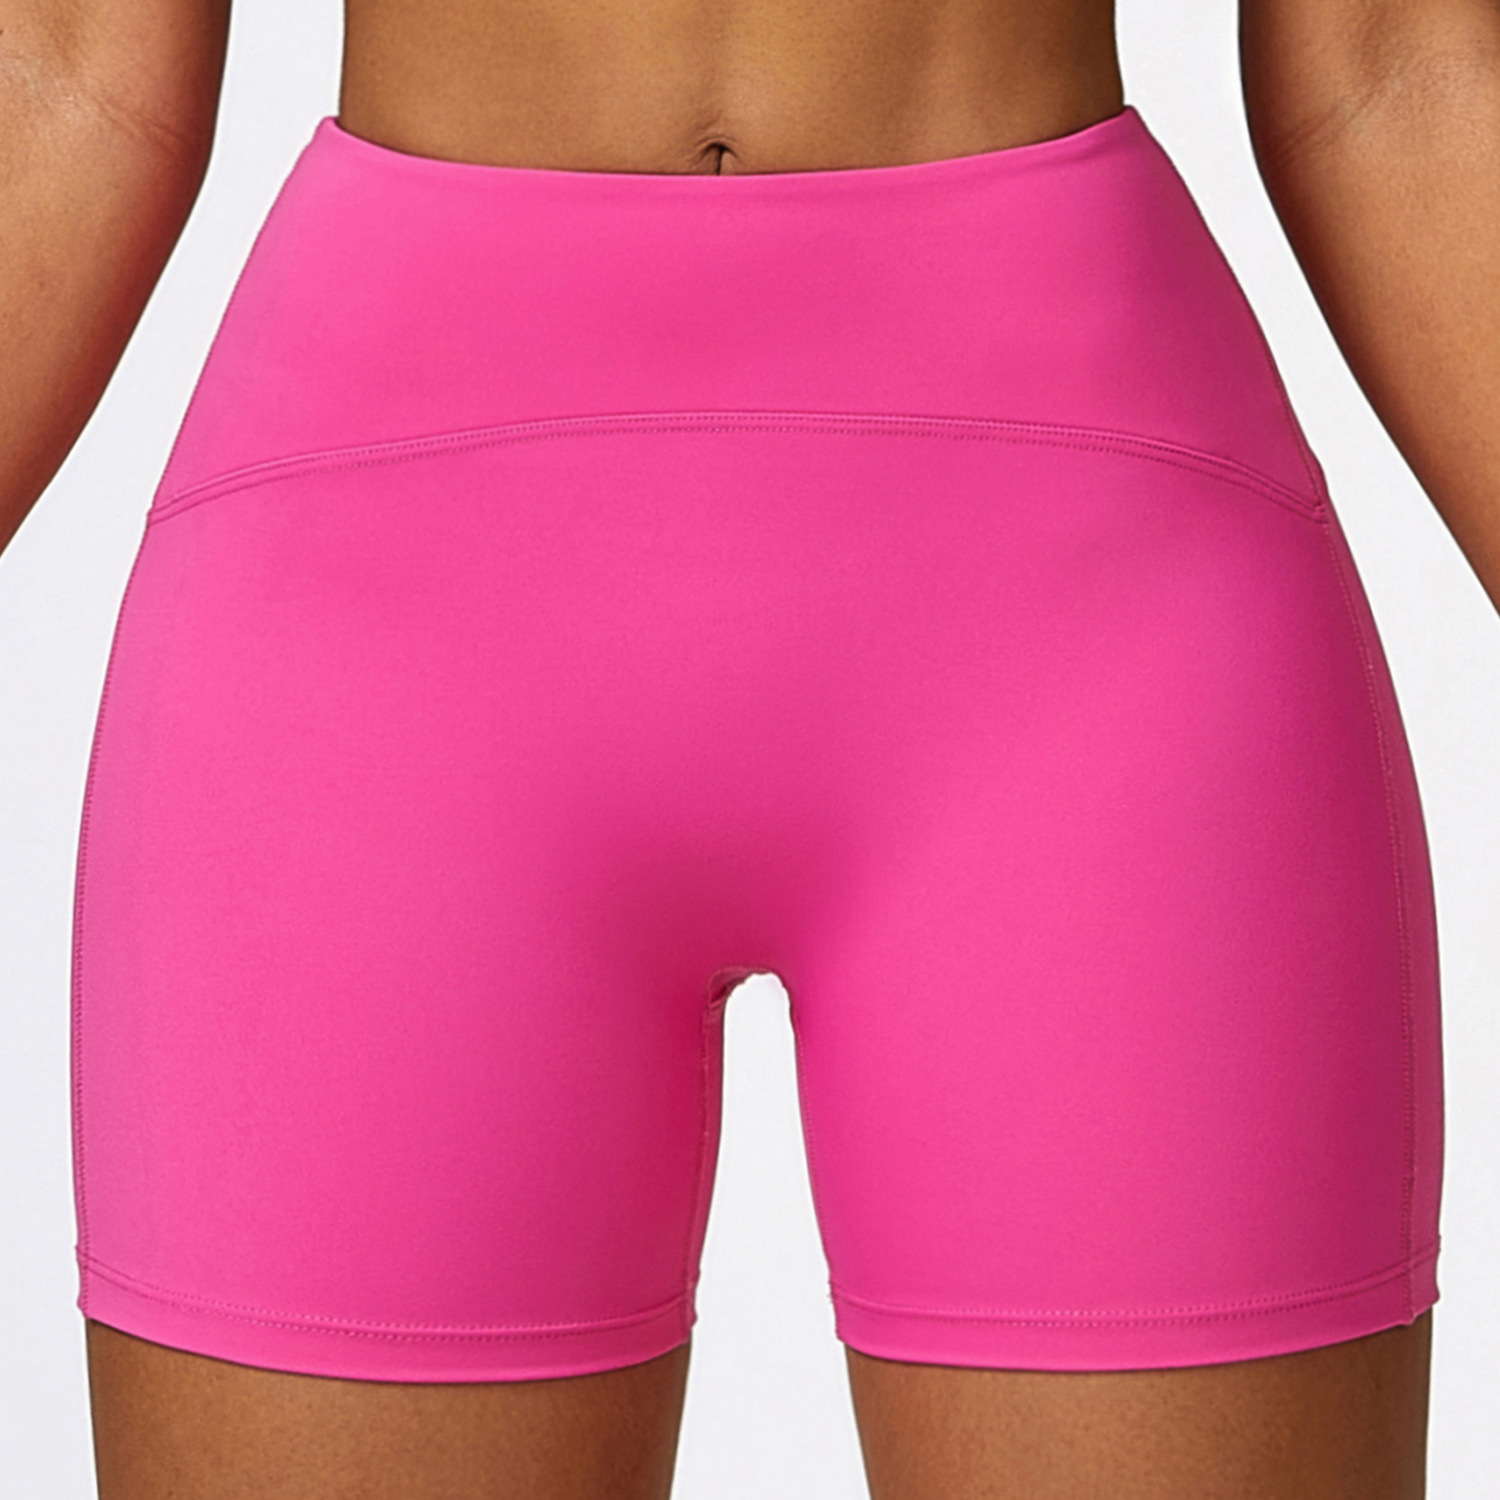 Eco-friendly recycled nude sports shorts quick drying tight yoga pants cycling running fitness shorts women